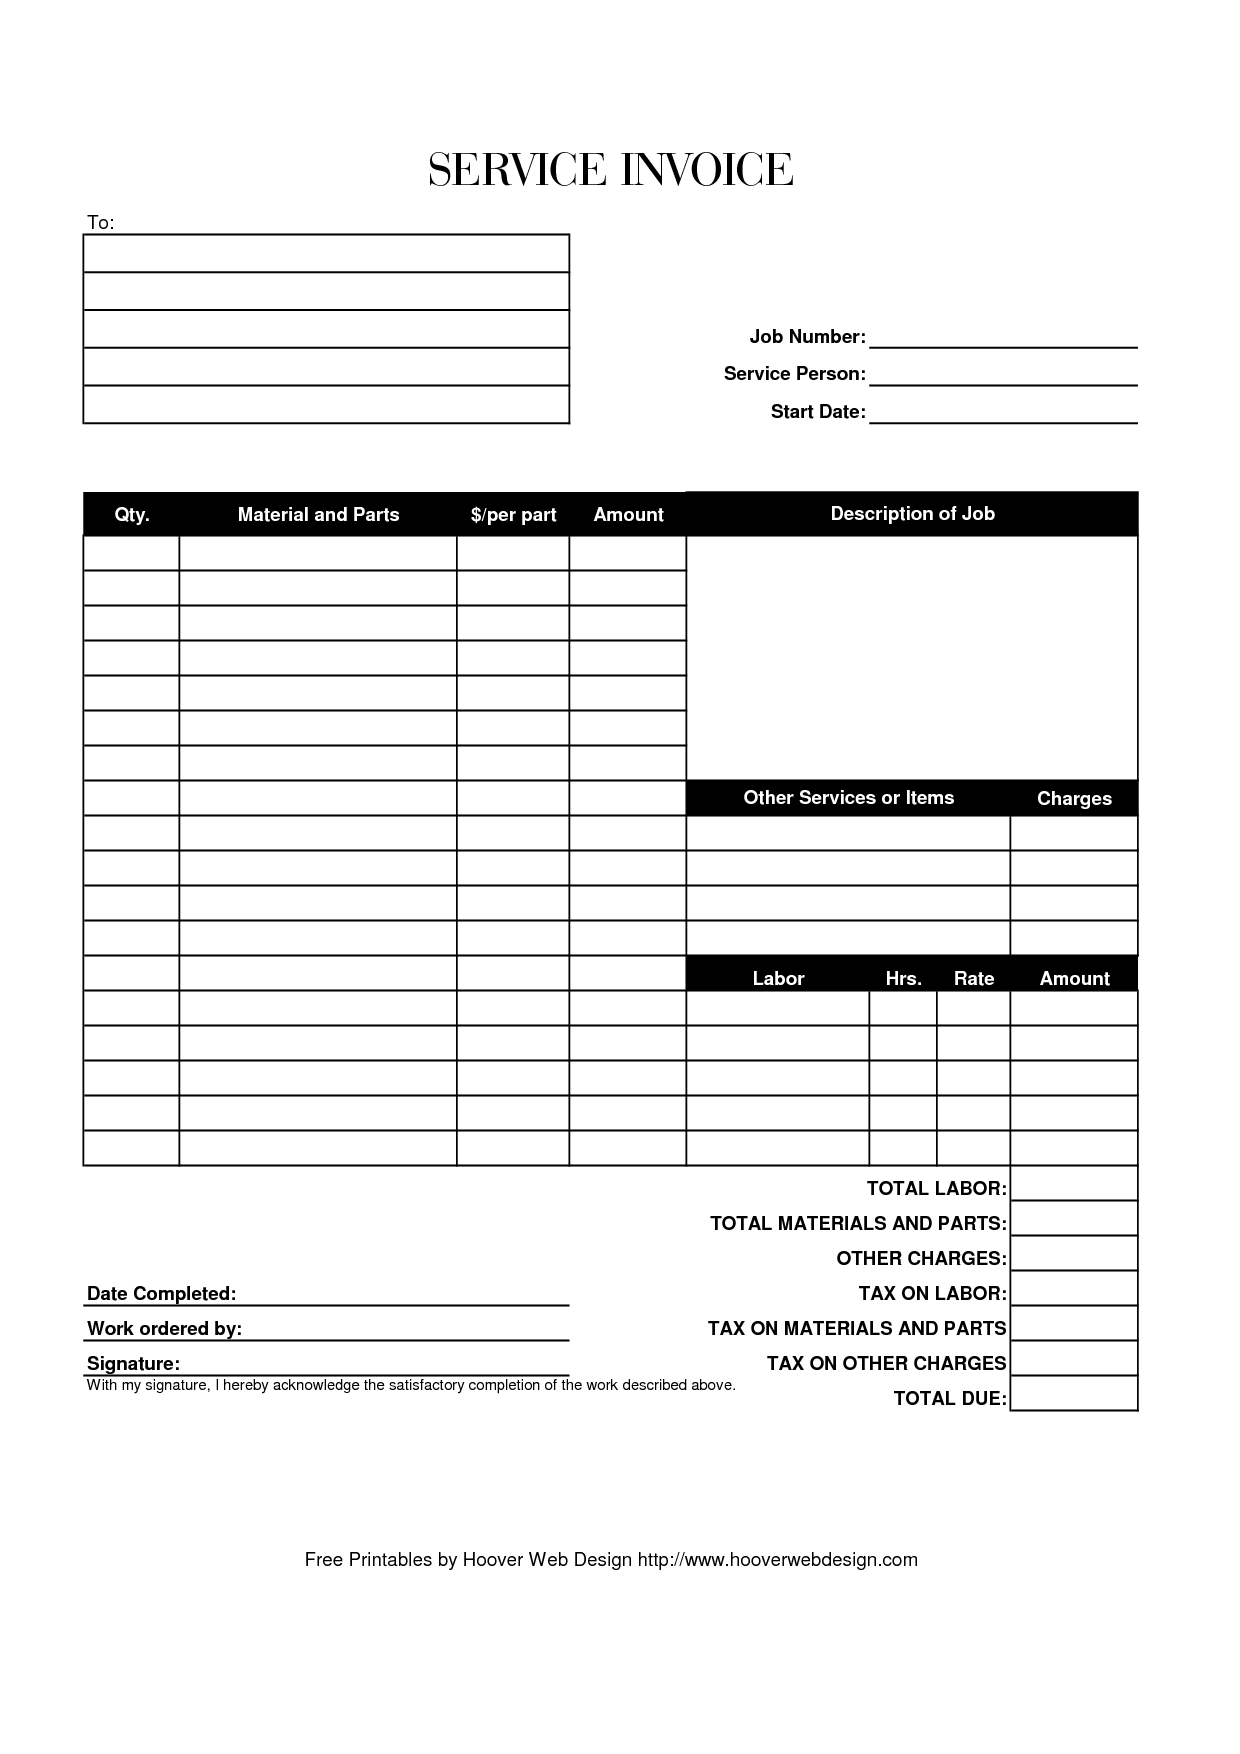 printable invoice template free best business template free service invoice template download